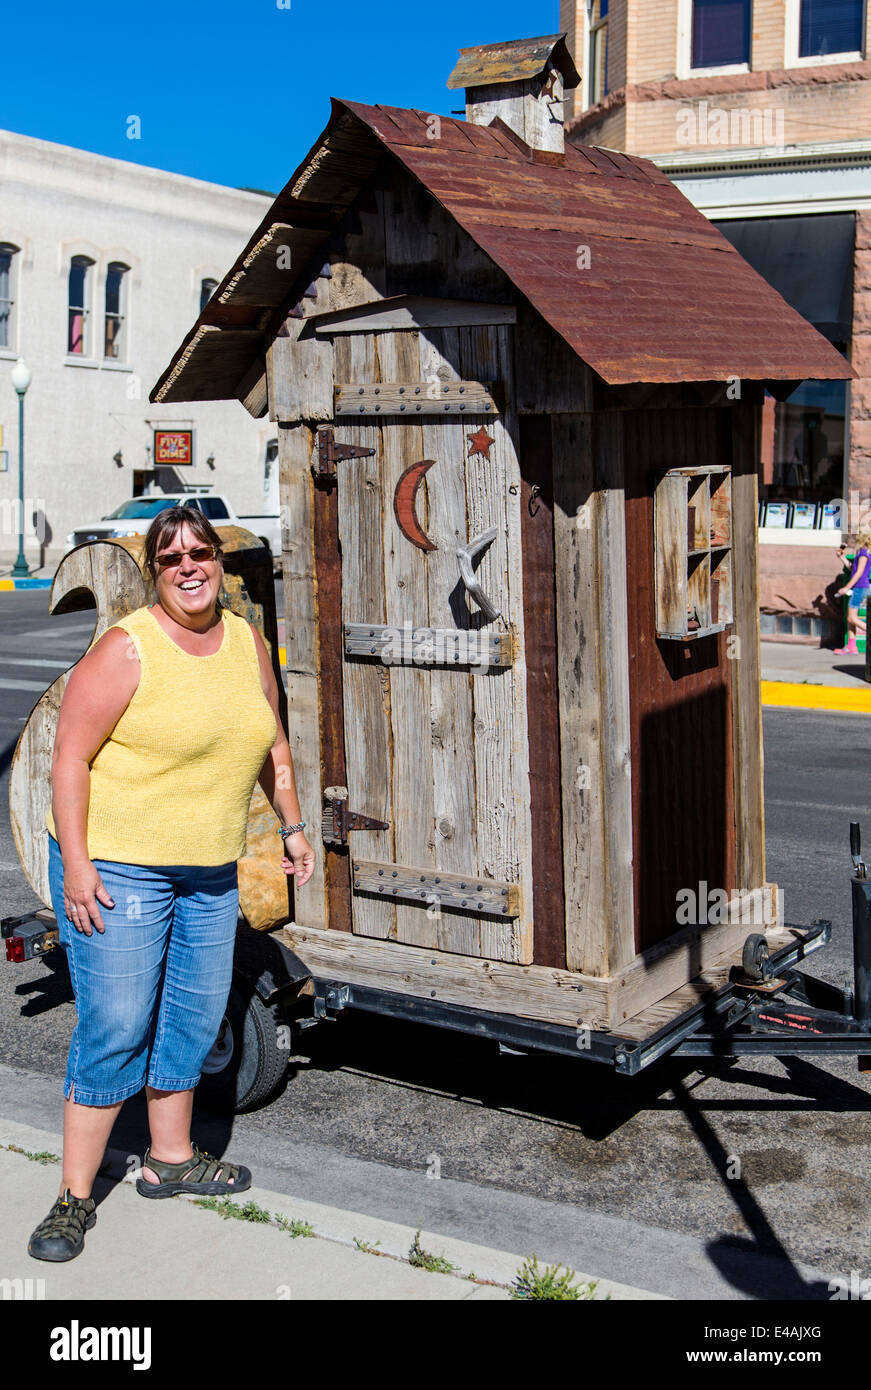 Out house on trailer; visitors enjoy artwork during the annual small town ArtWalk Festival Stock Photo